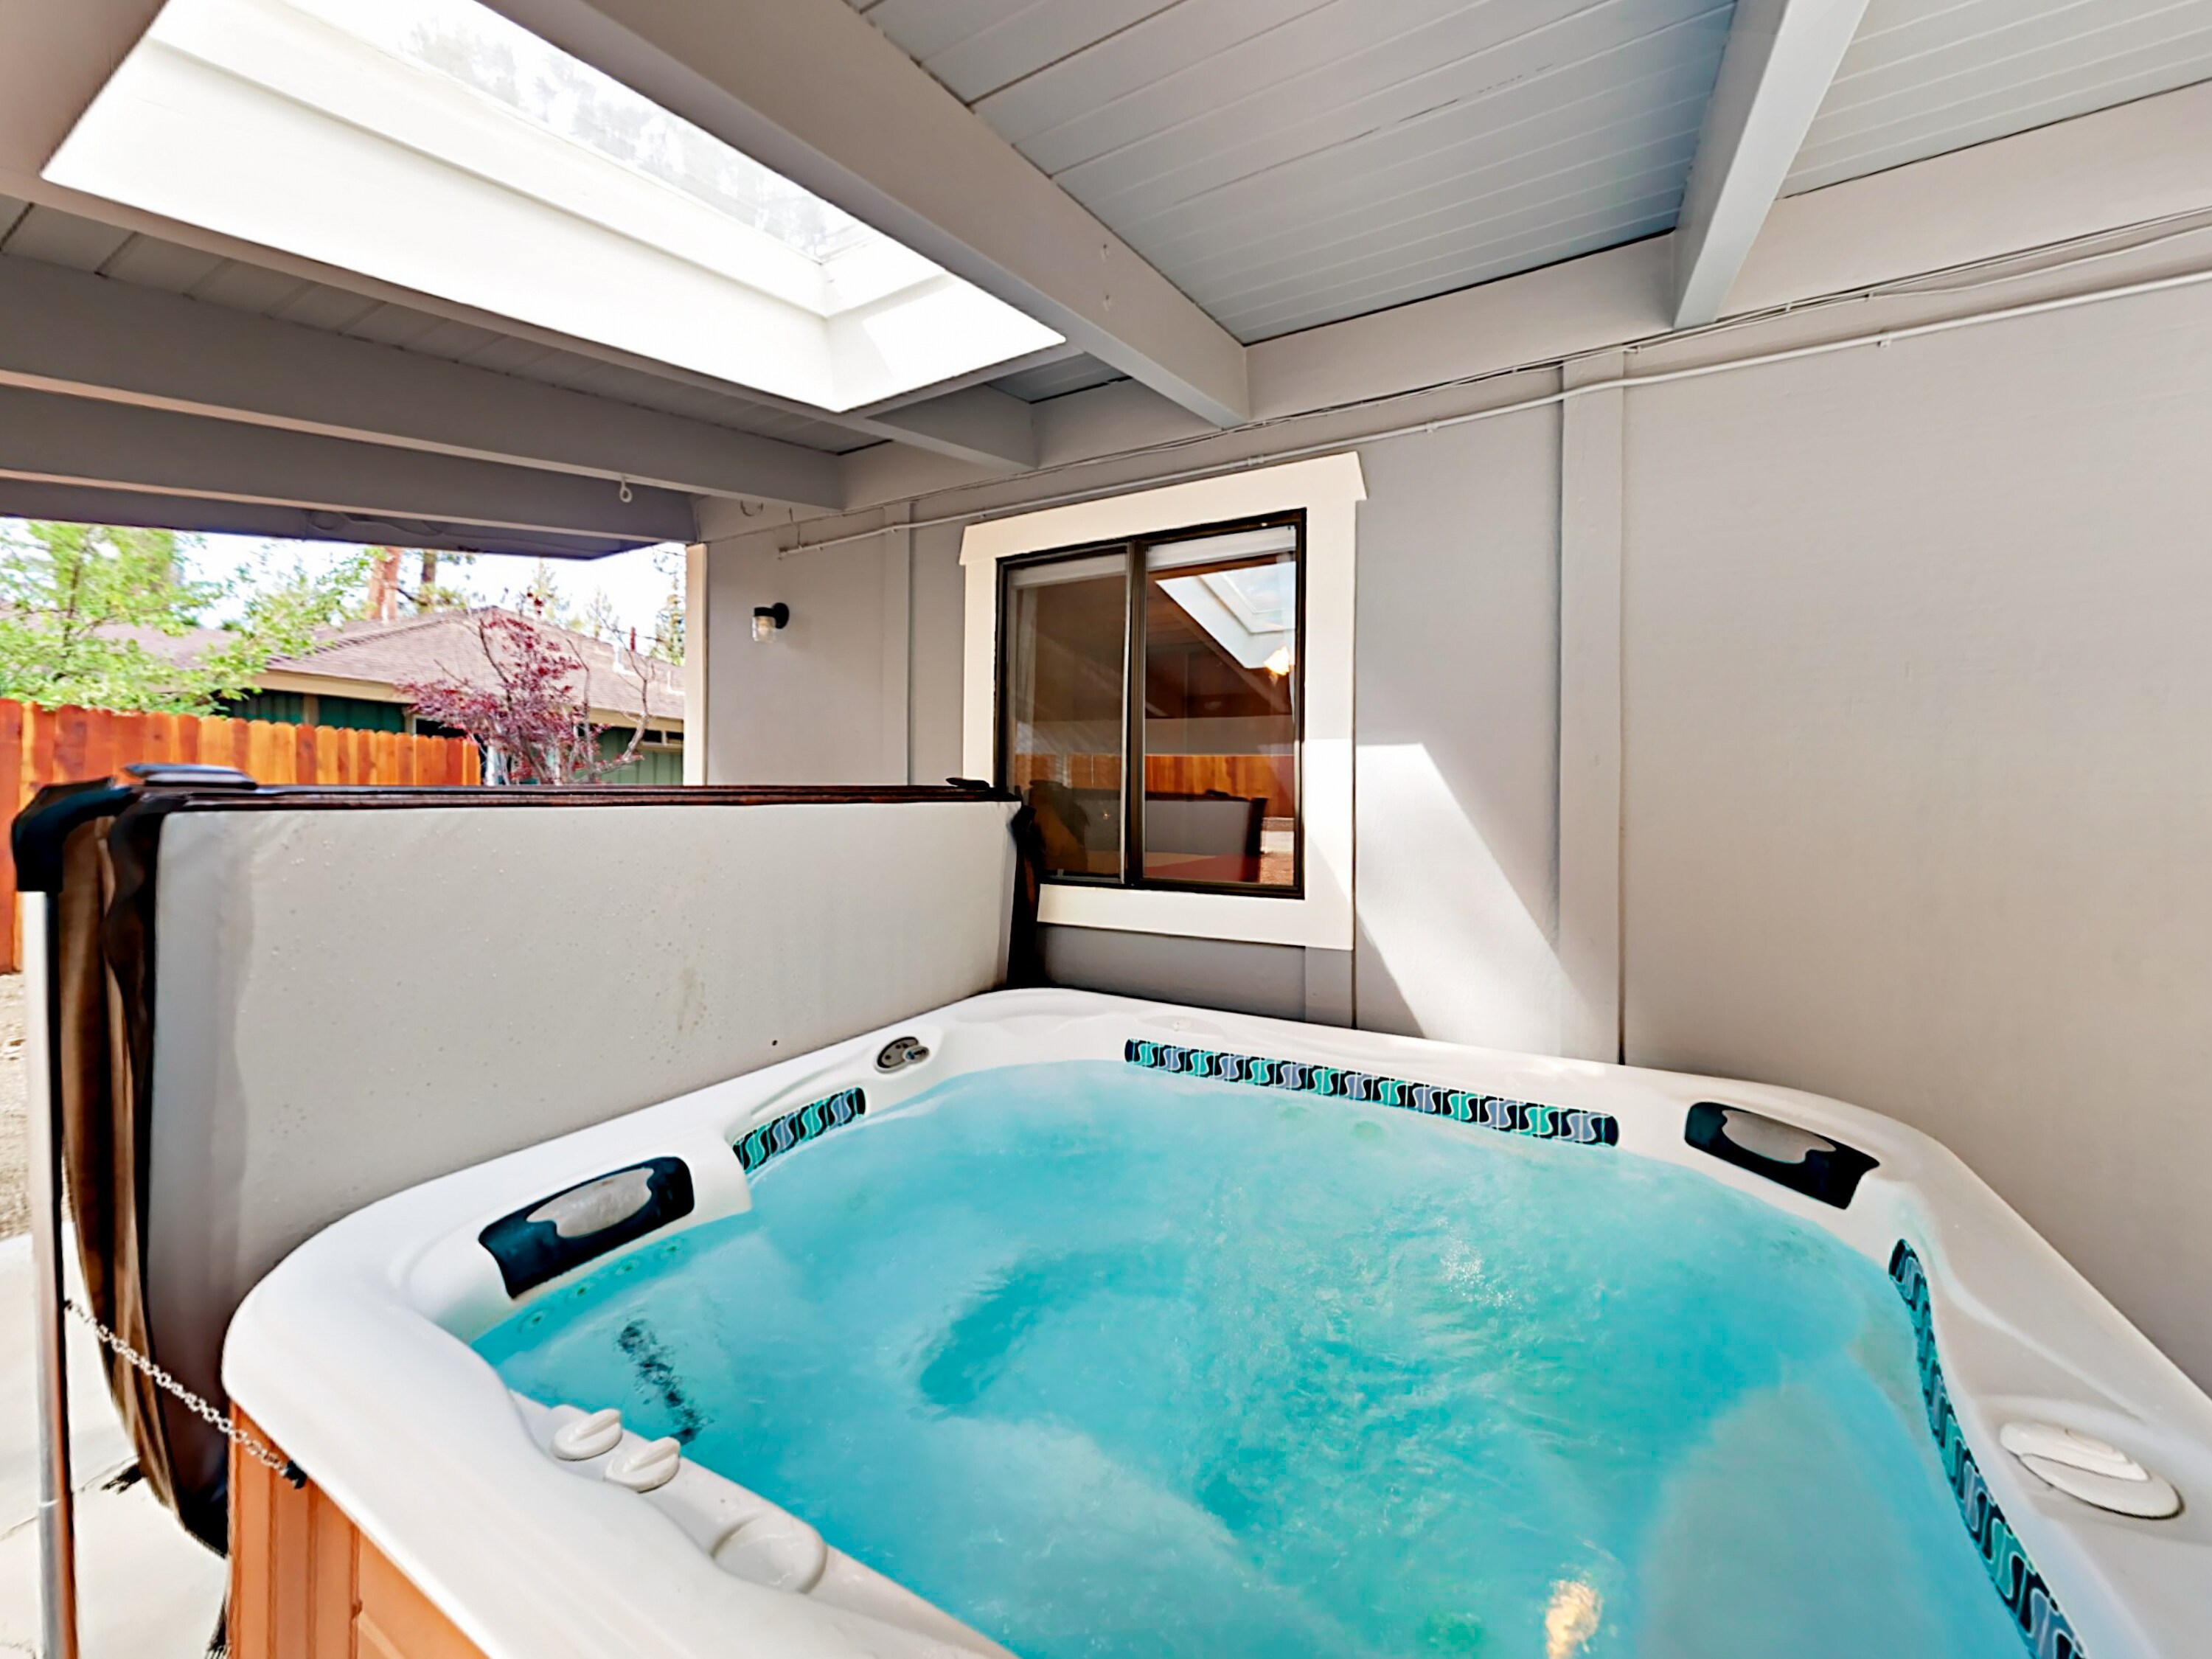 After a fun-filled day of outdoor adventures, take an indulgent soak in the private hot tub.